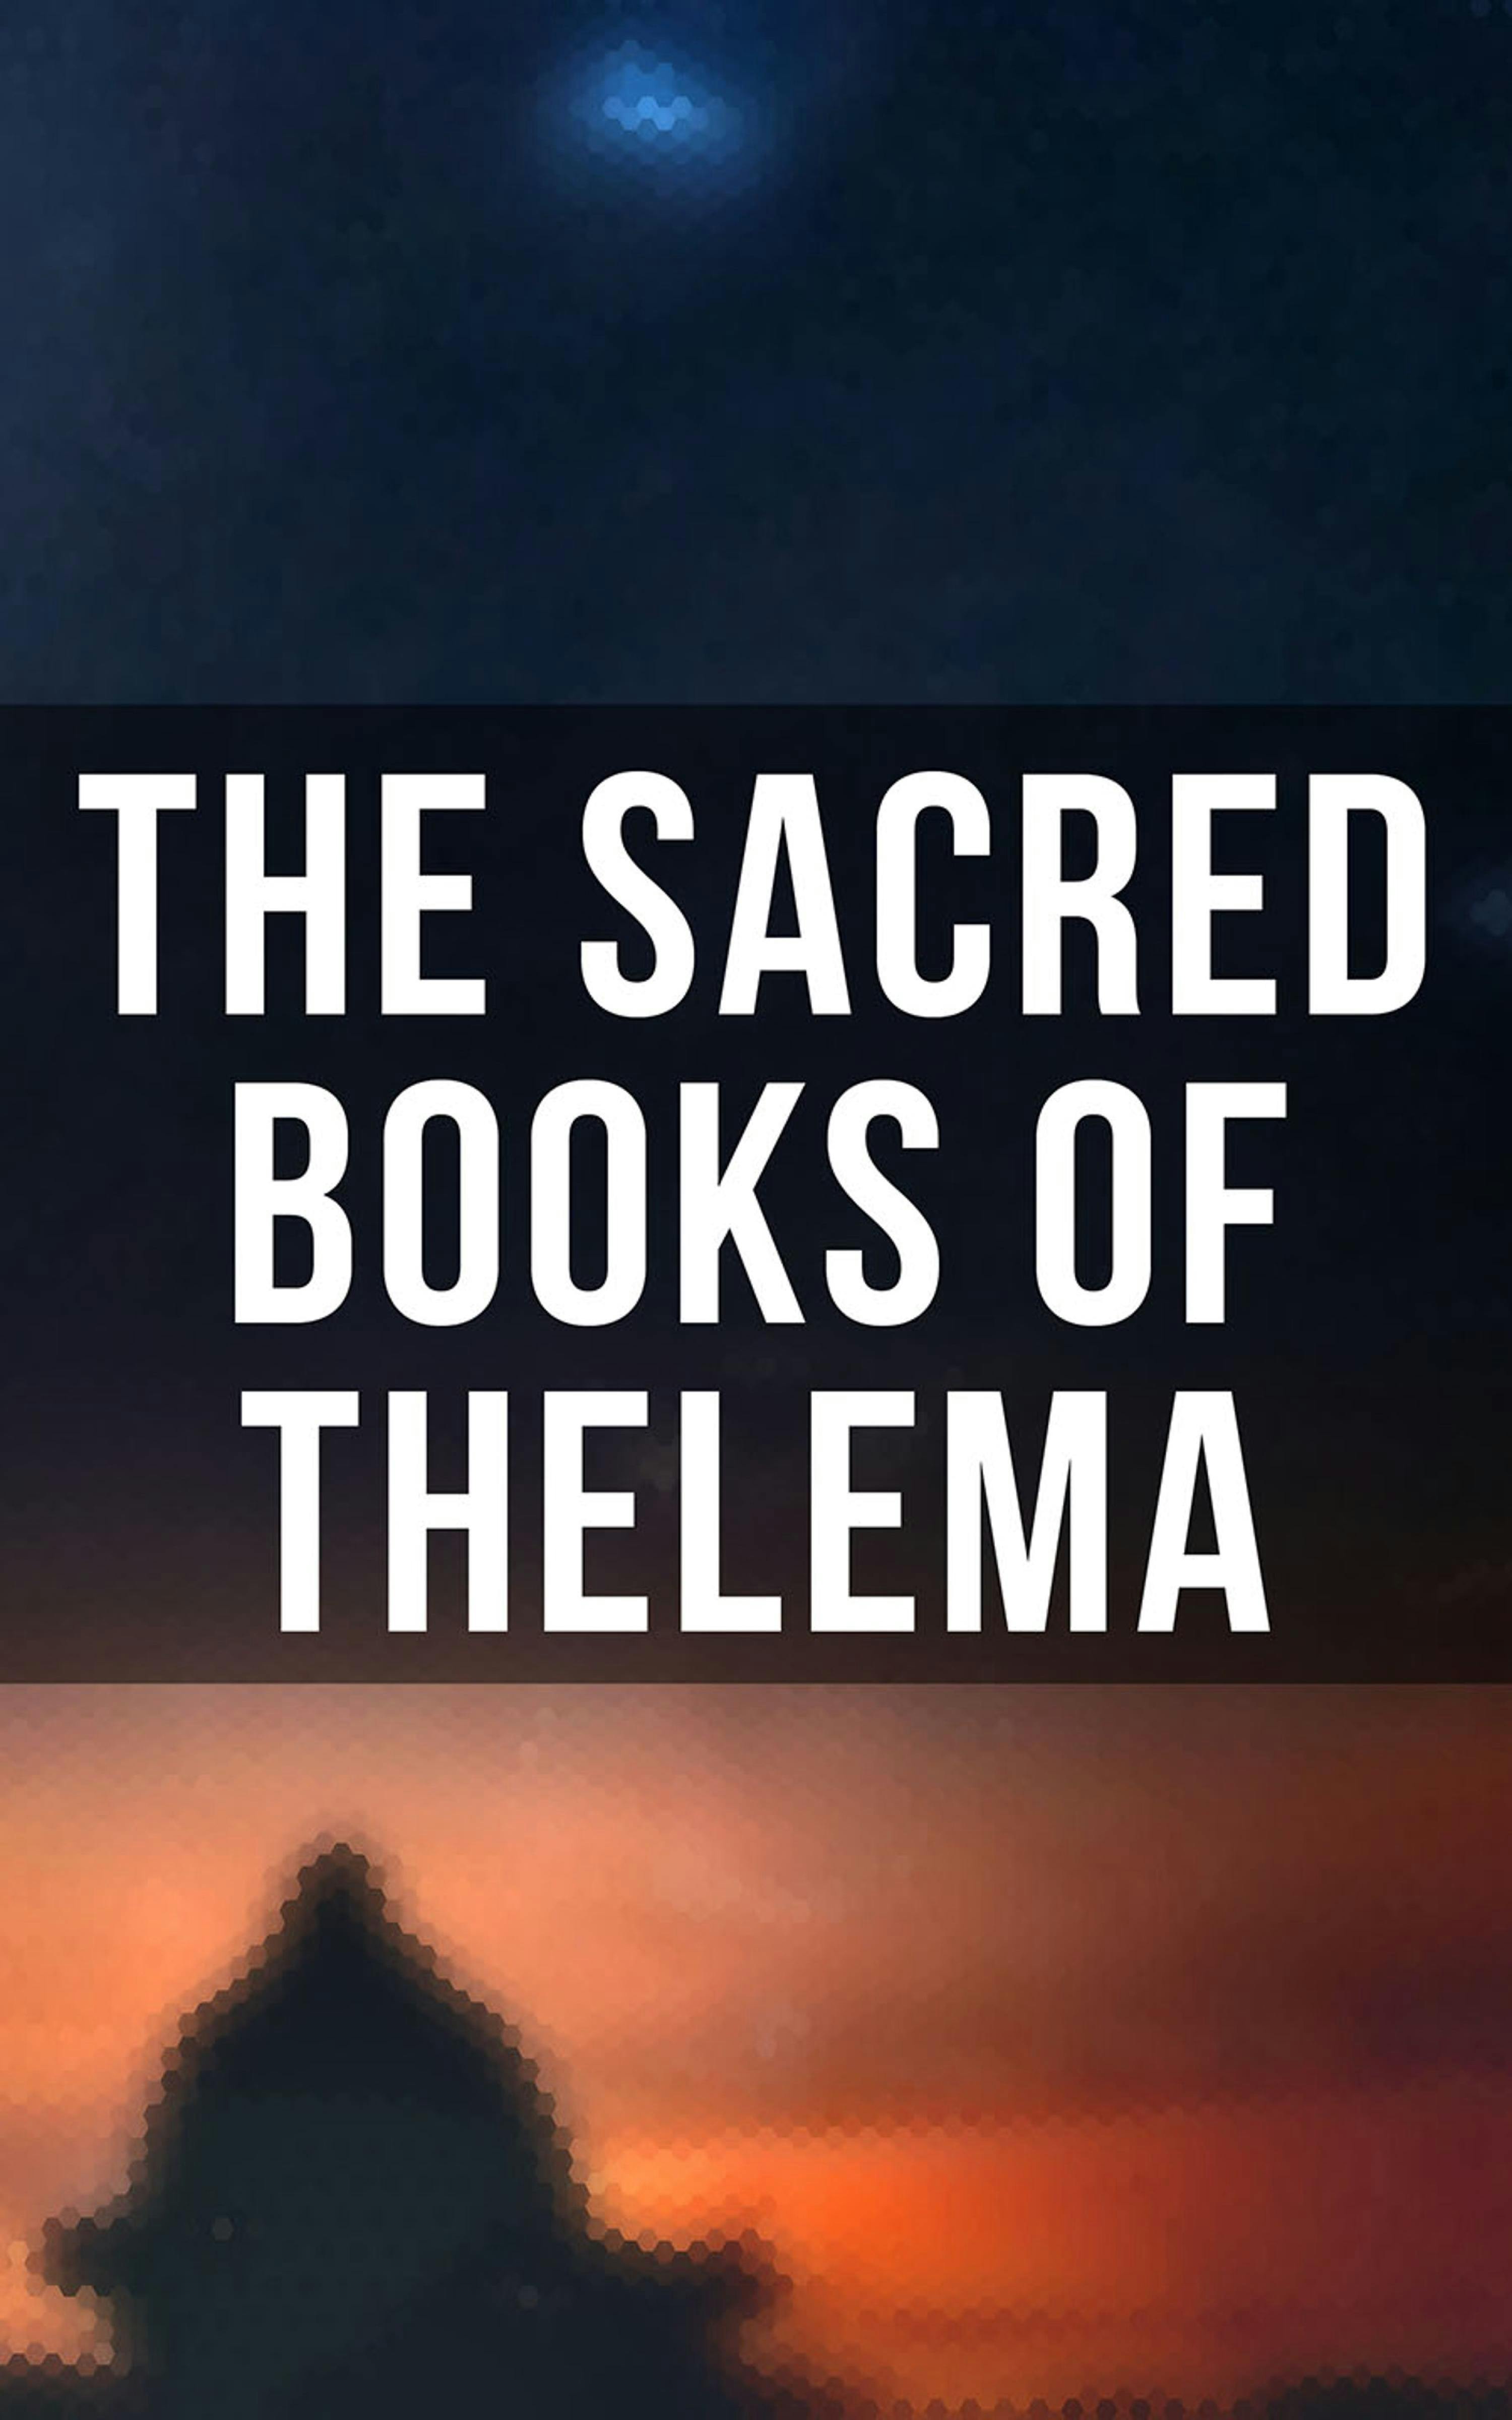 The Sacred Books of Thelema: The Book of the Law, Ecclesiæ Gnosticæ Catholicæ Creed - Mary d'Este Sturges, S. L. MacGregor Mathers, Aleister Crowley